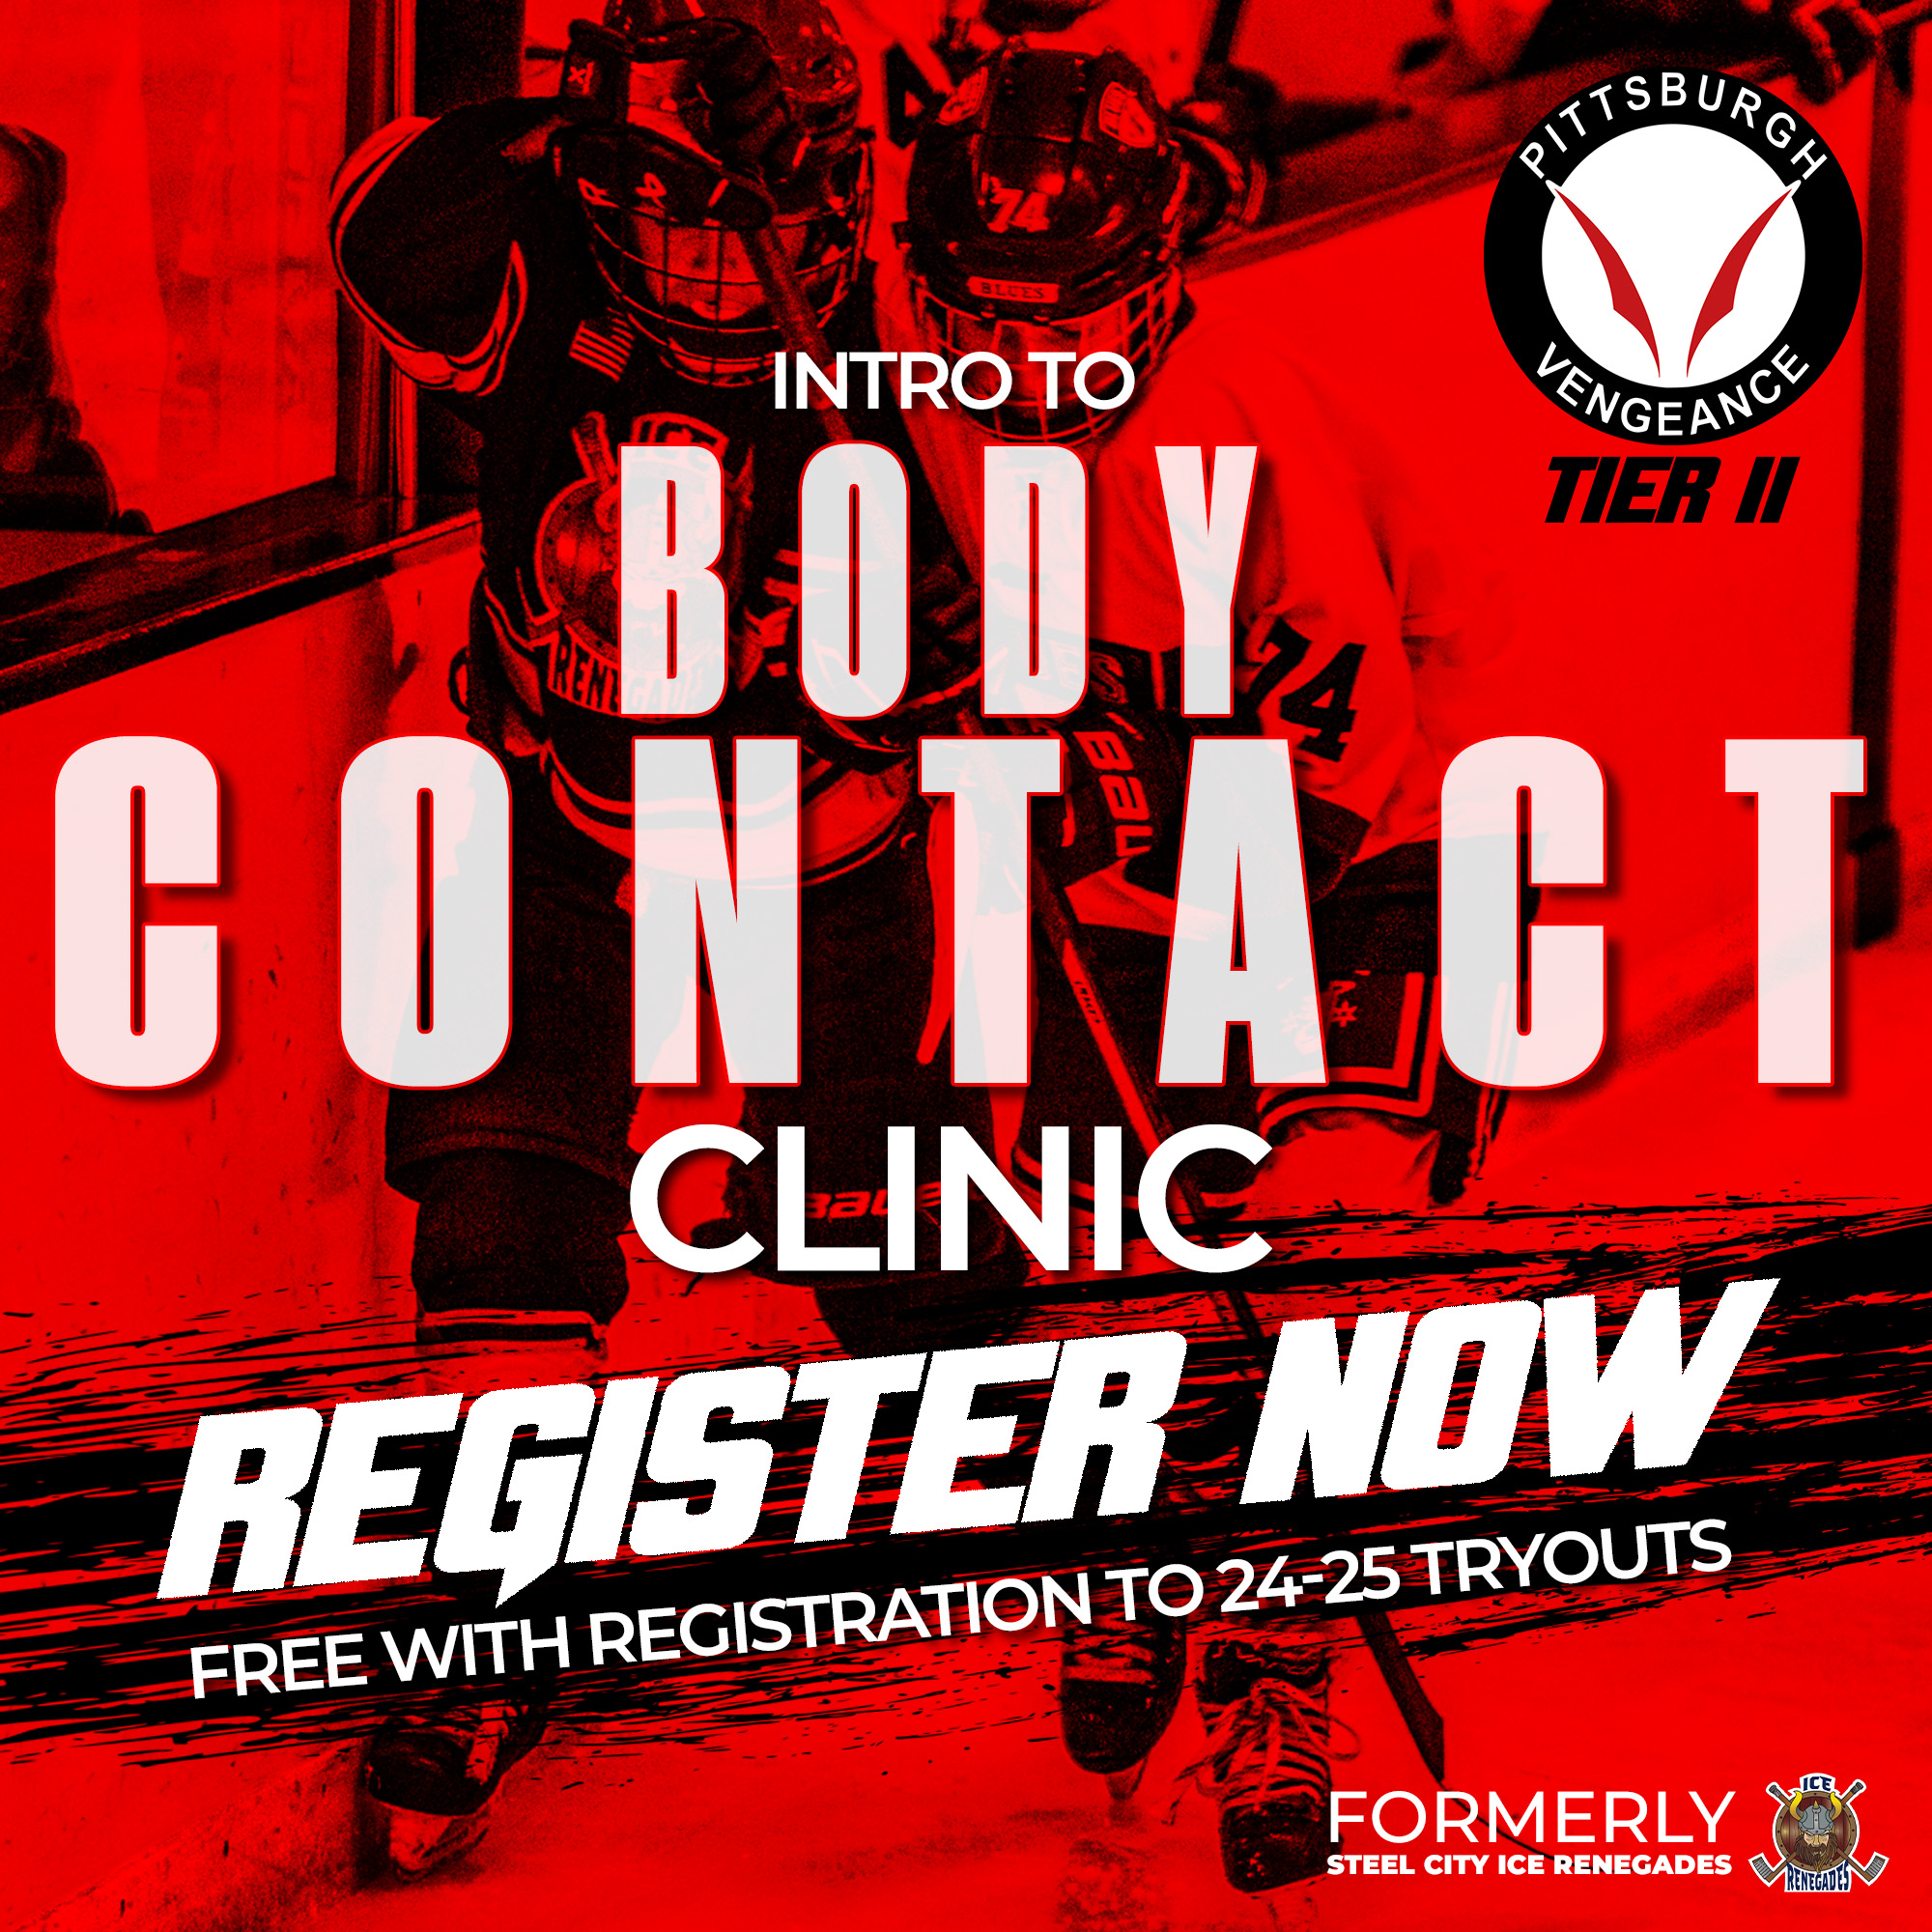 Body Contact Clinic